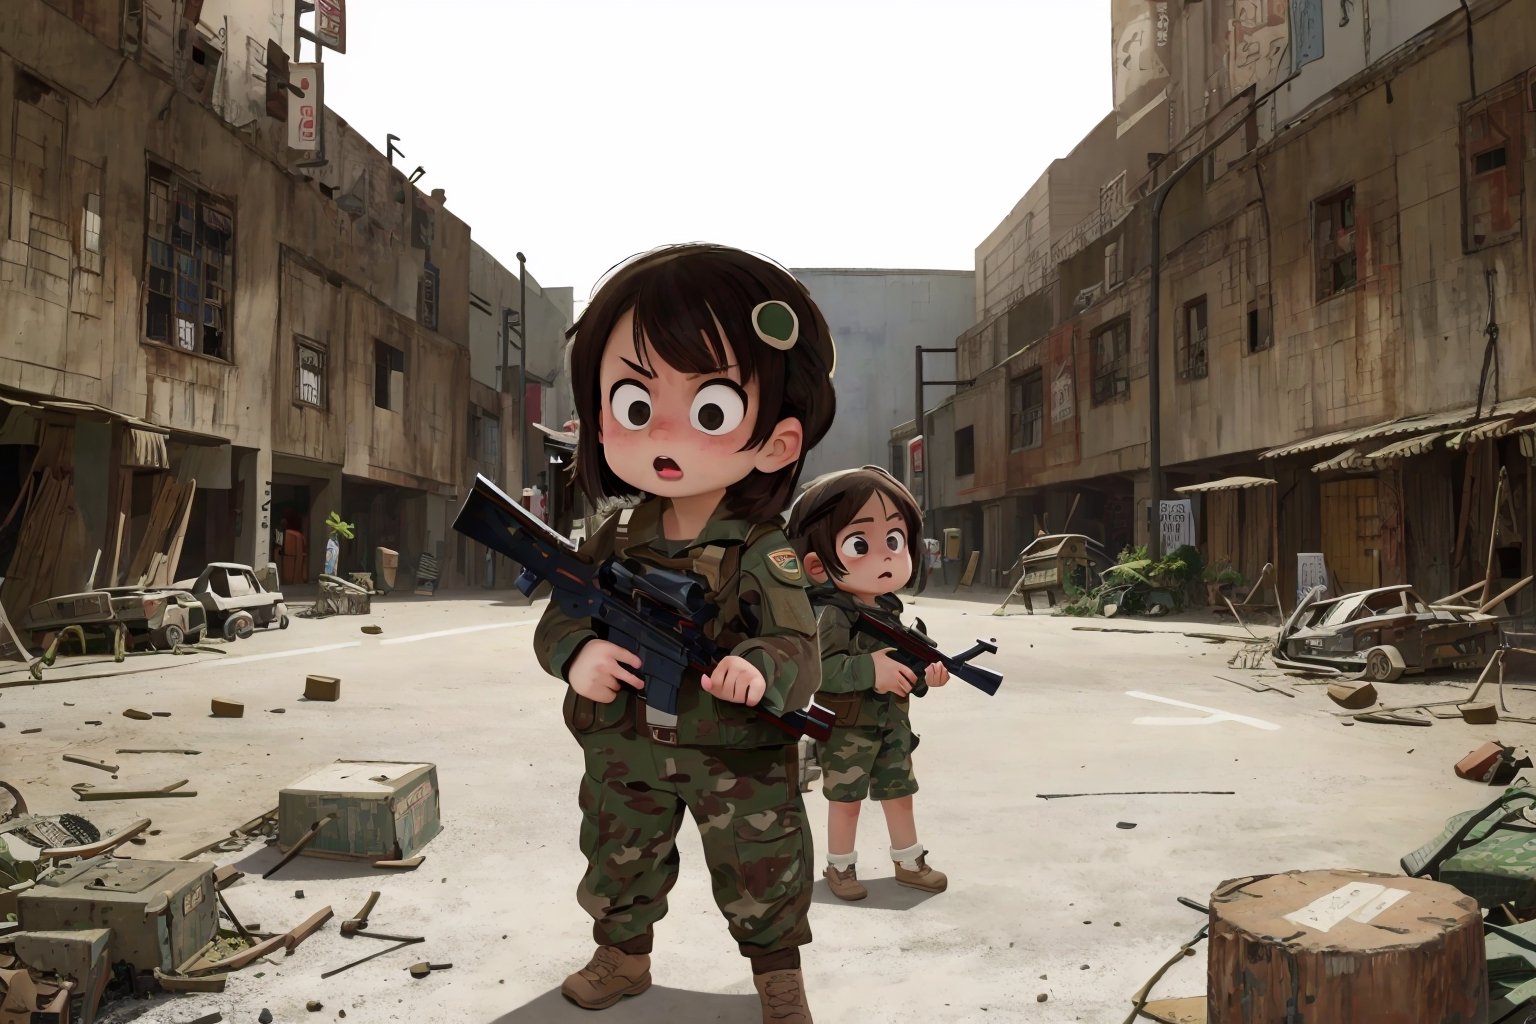 assault rifle, holding a rifle, soldier clothing,
Iran, Afghanistan
fire, war crimes, apocalypse, war crimes, terrorism, terrorist, destroyed car

  assault rifle, firearm
Debris, destruction, ruined city, death and destruction.
​
2 girls
Angry, angry look, 
child, child focusloli focus, a girl dressed as a soldier, surrounded by war destruction, cloudy day, high quality, high detail, immersive atmosphere, fantai12,DonMG414, horror,full body,full_gear_soldier,full gear,soldier,edhop_style